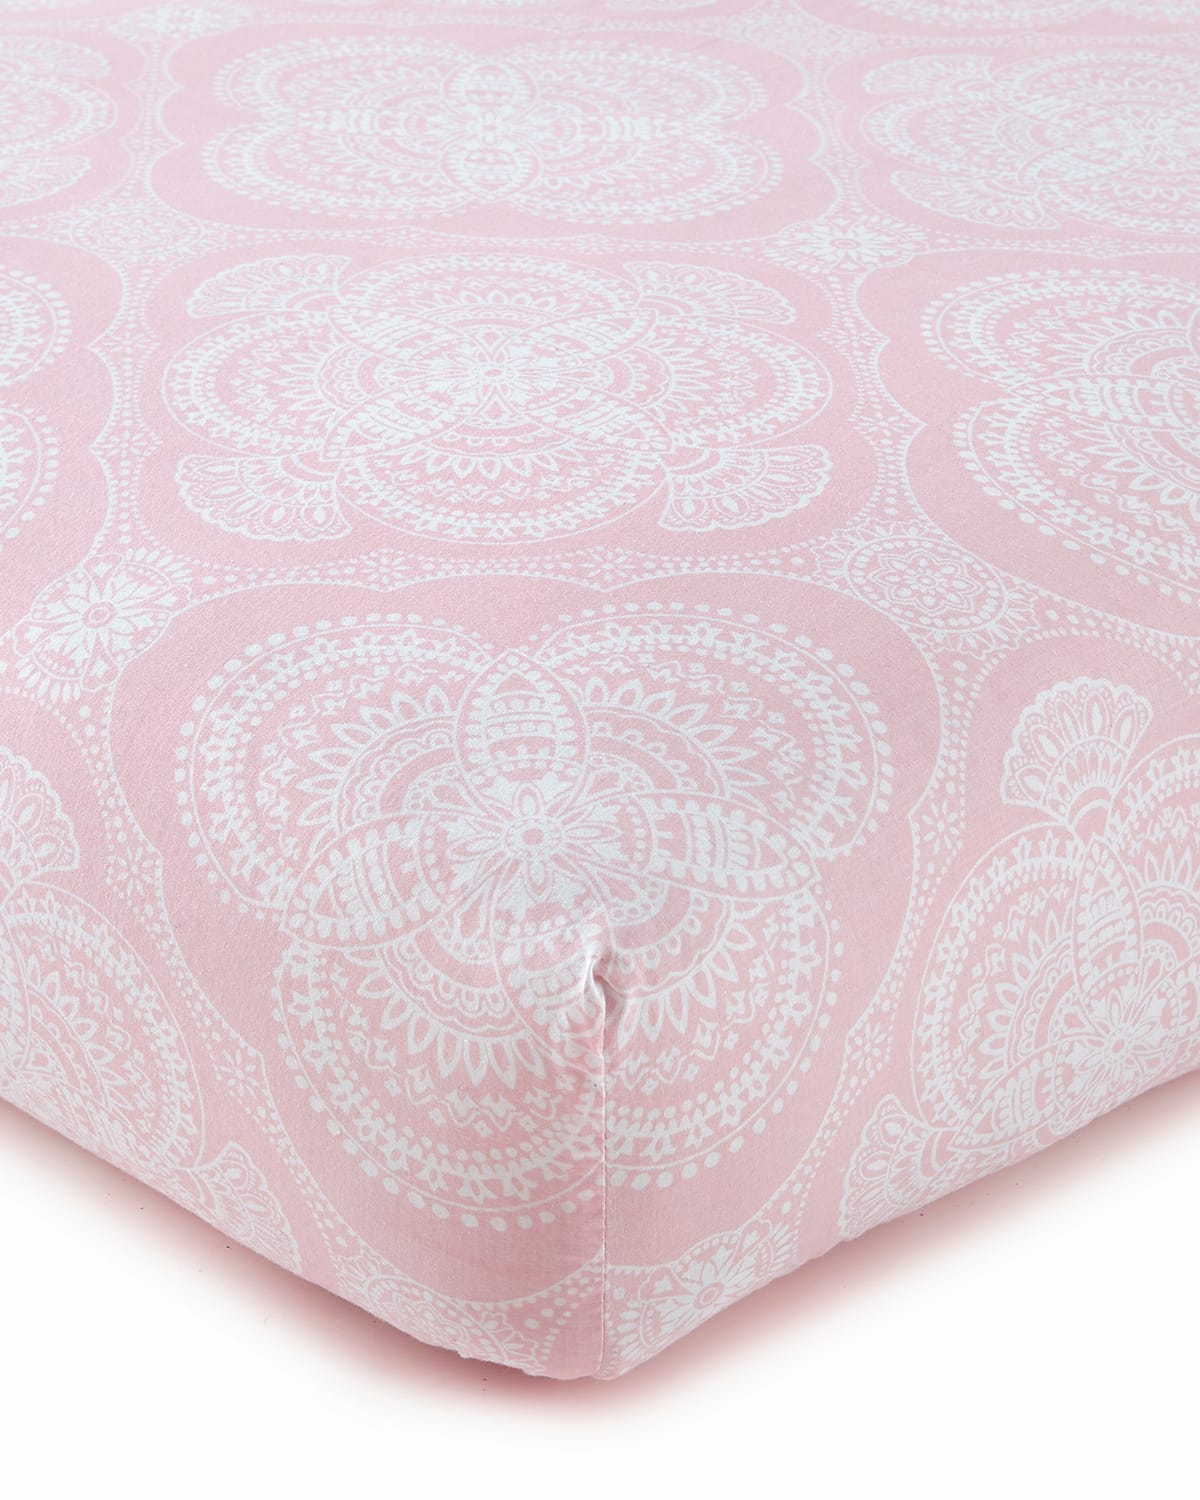 Shop Levtex Willow Medallion Fitted Crib Sheet, Pink